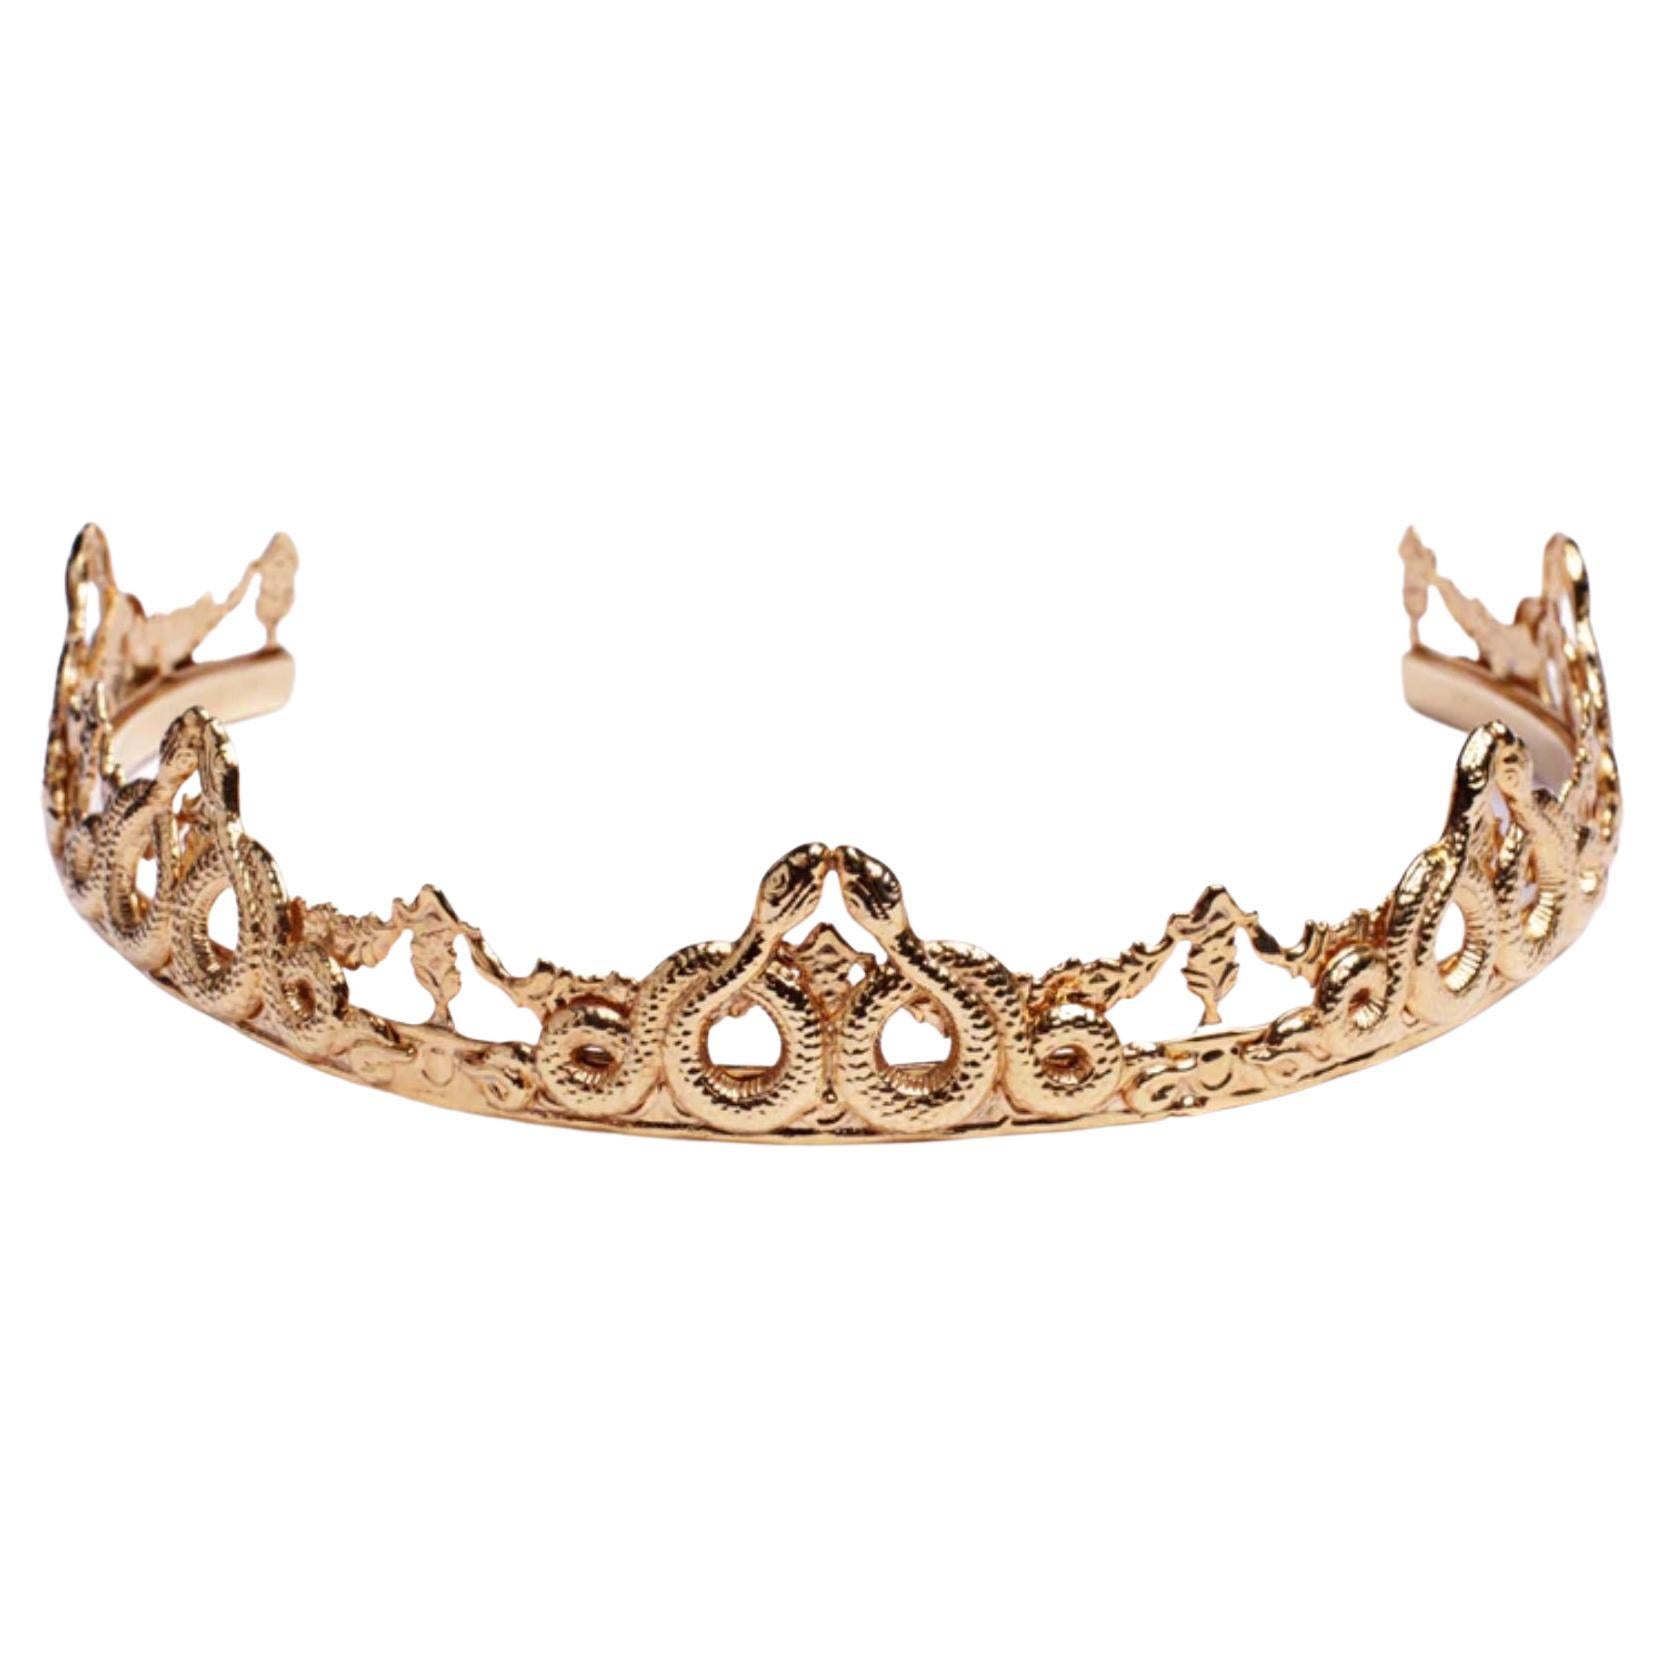 24K Gold Plated Serpent Tiara For Sale